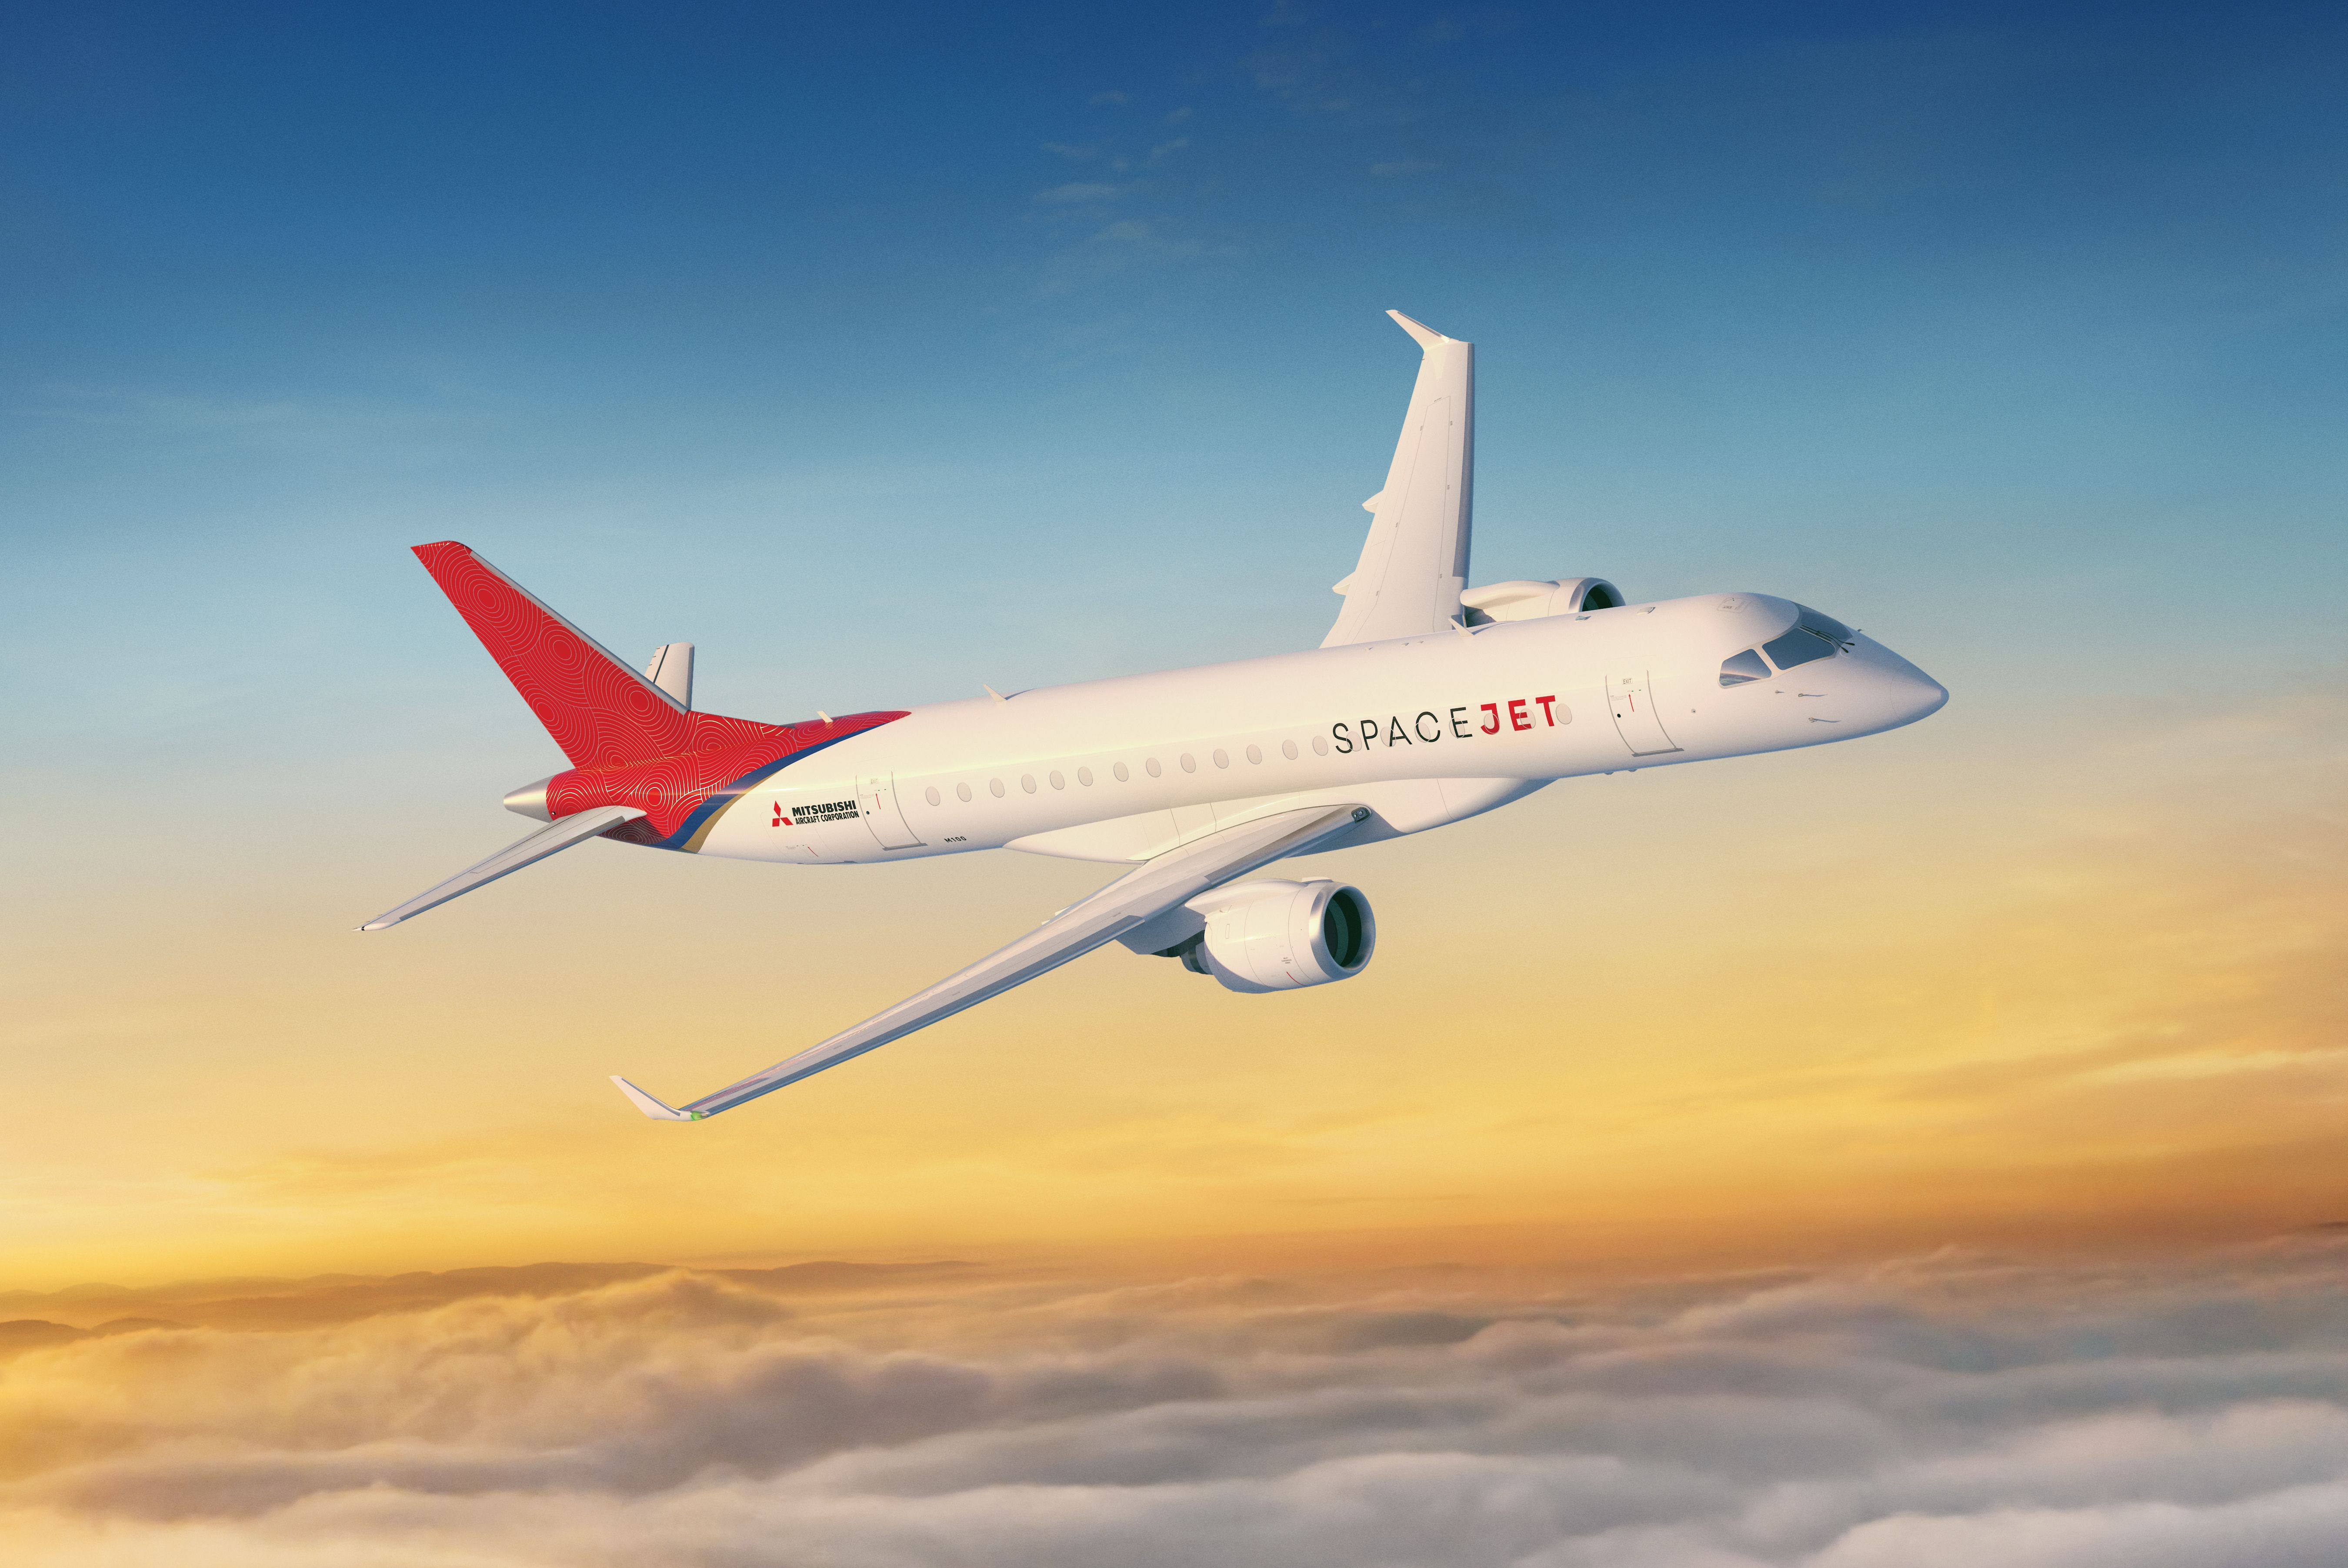 Mitsubishi expects more comfortable regional flights on new 'SpaceJet'